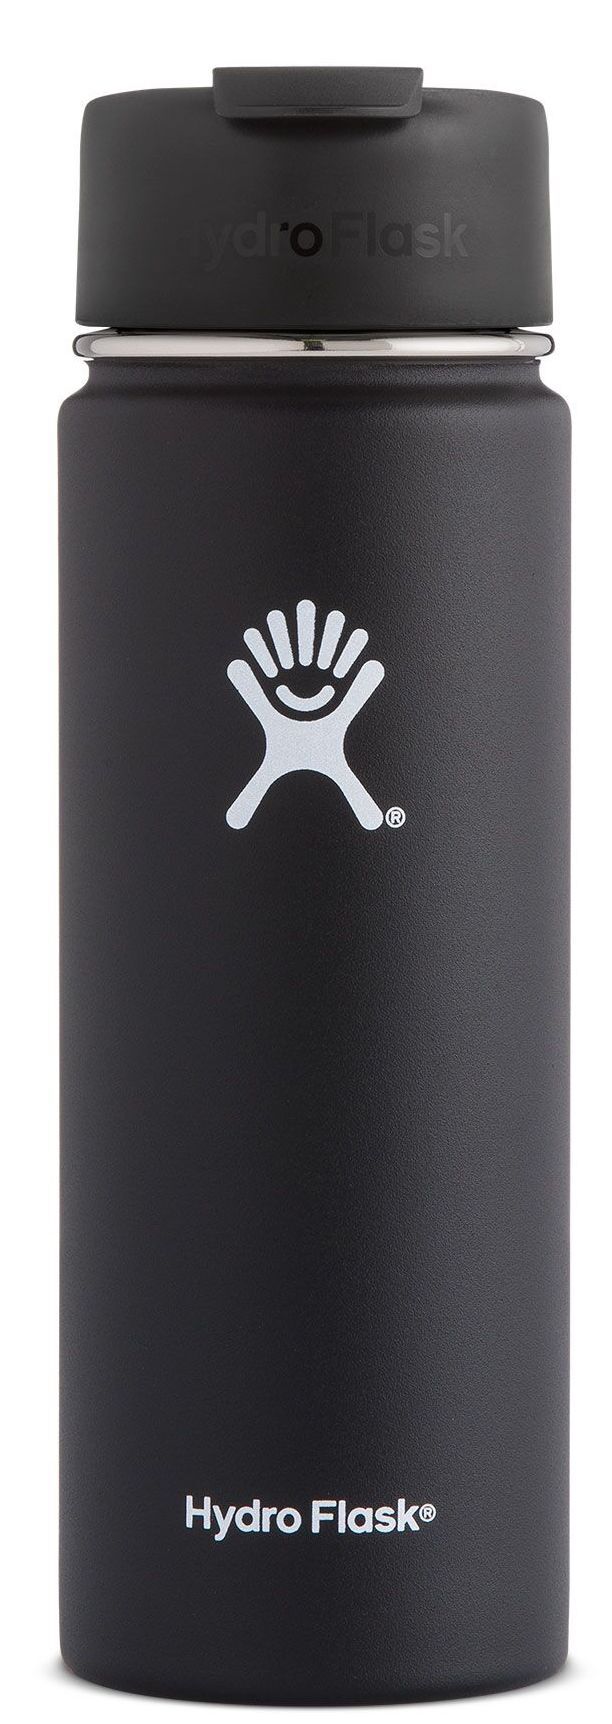 Hydro Flask 20 oz Wide Mouth - Isoleerfles 591 mL